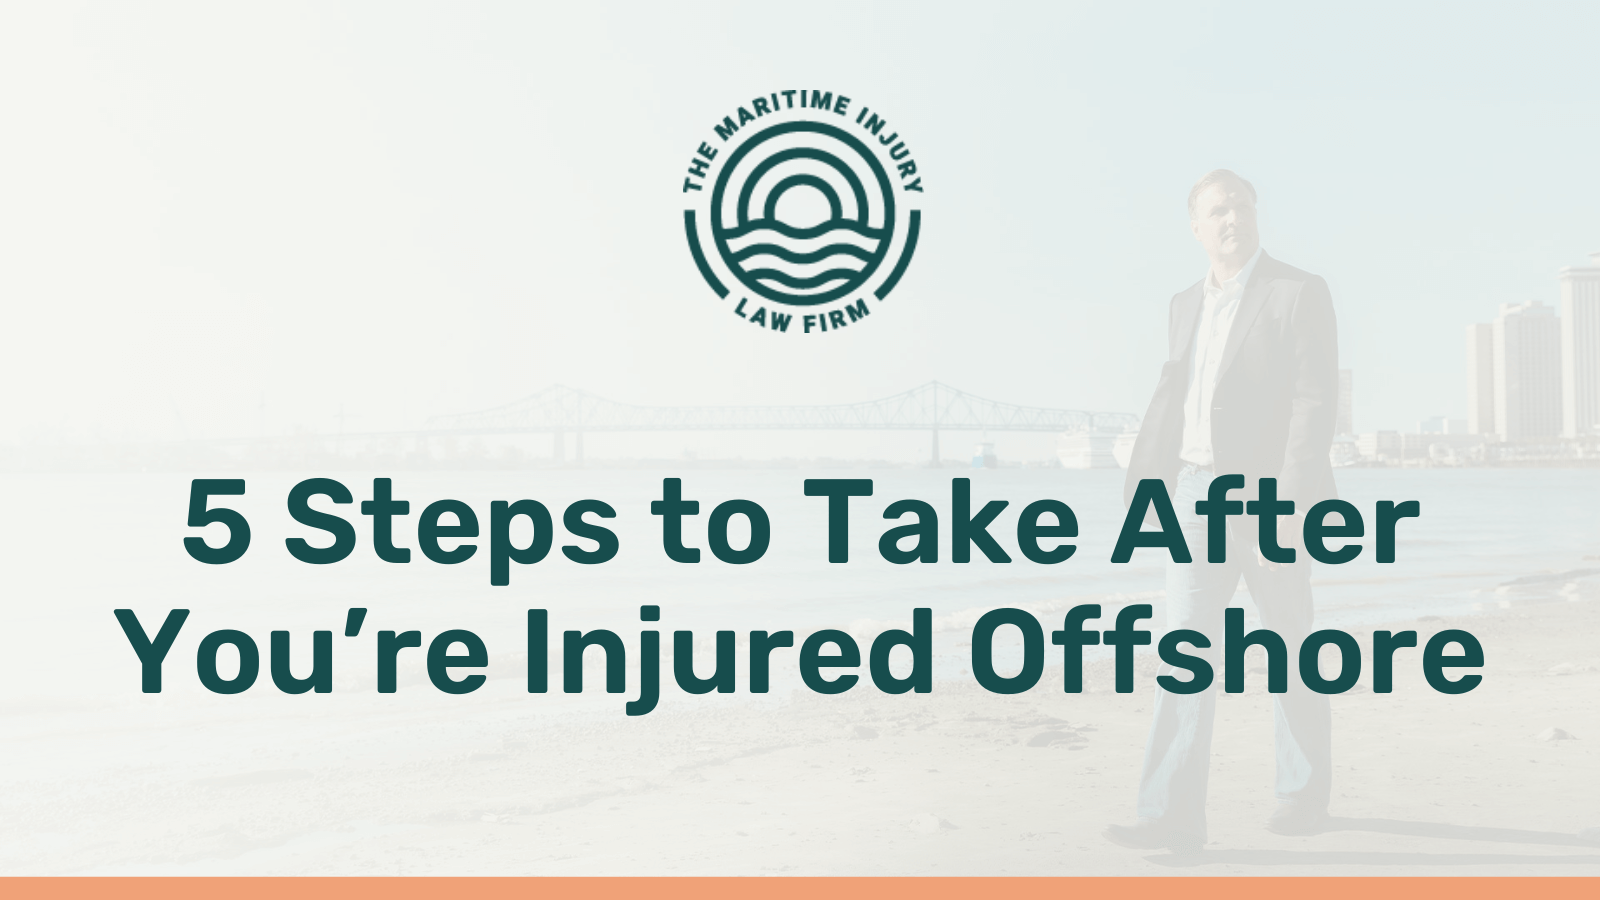 5 Steps to Take After You’re Injured Offshore - maritime injury law firm - George Vourvoulias